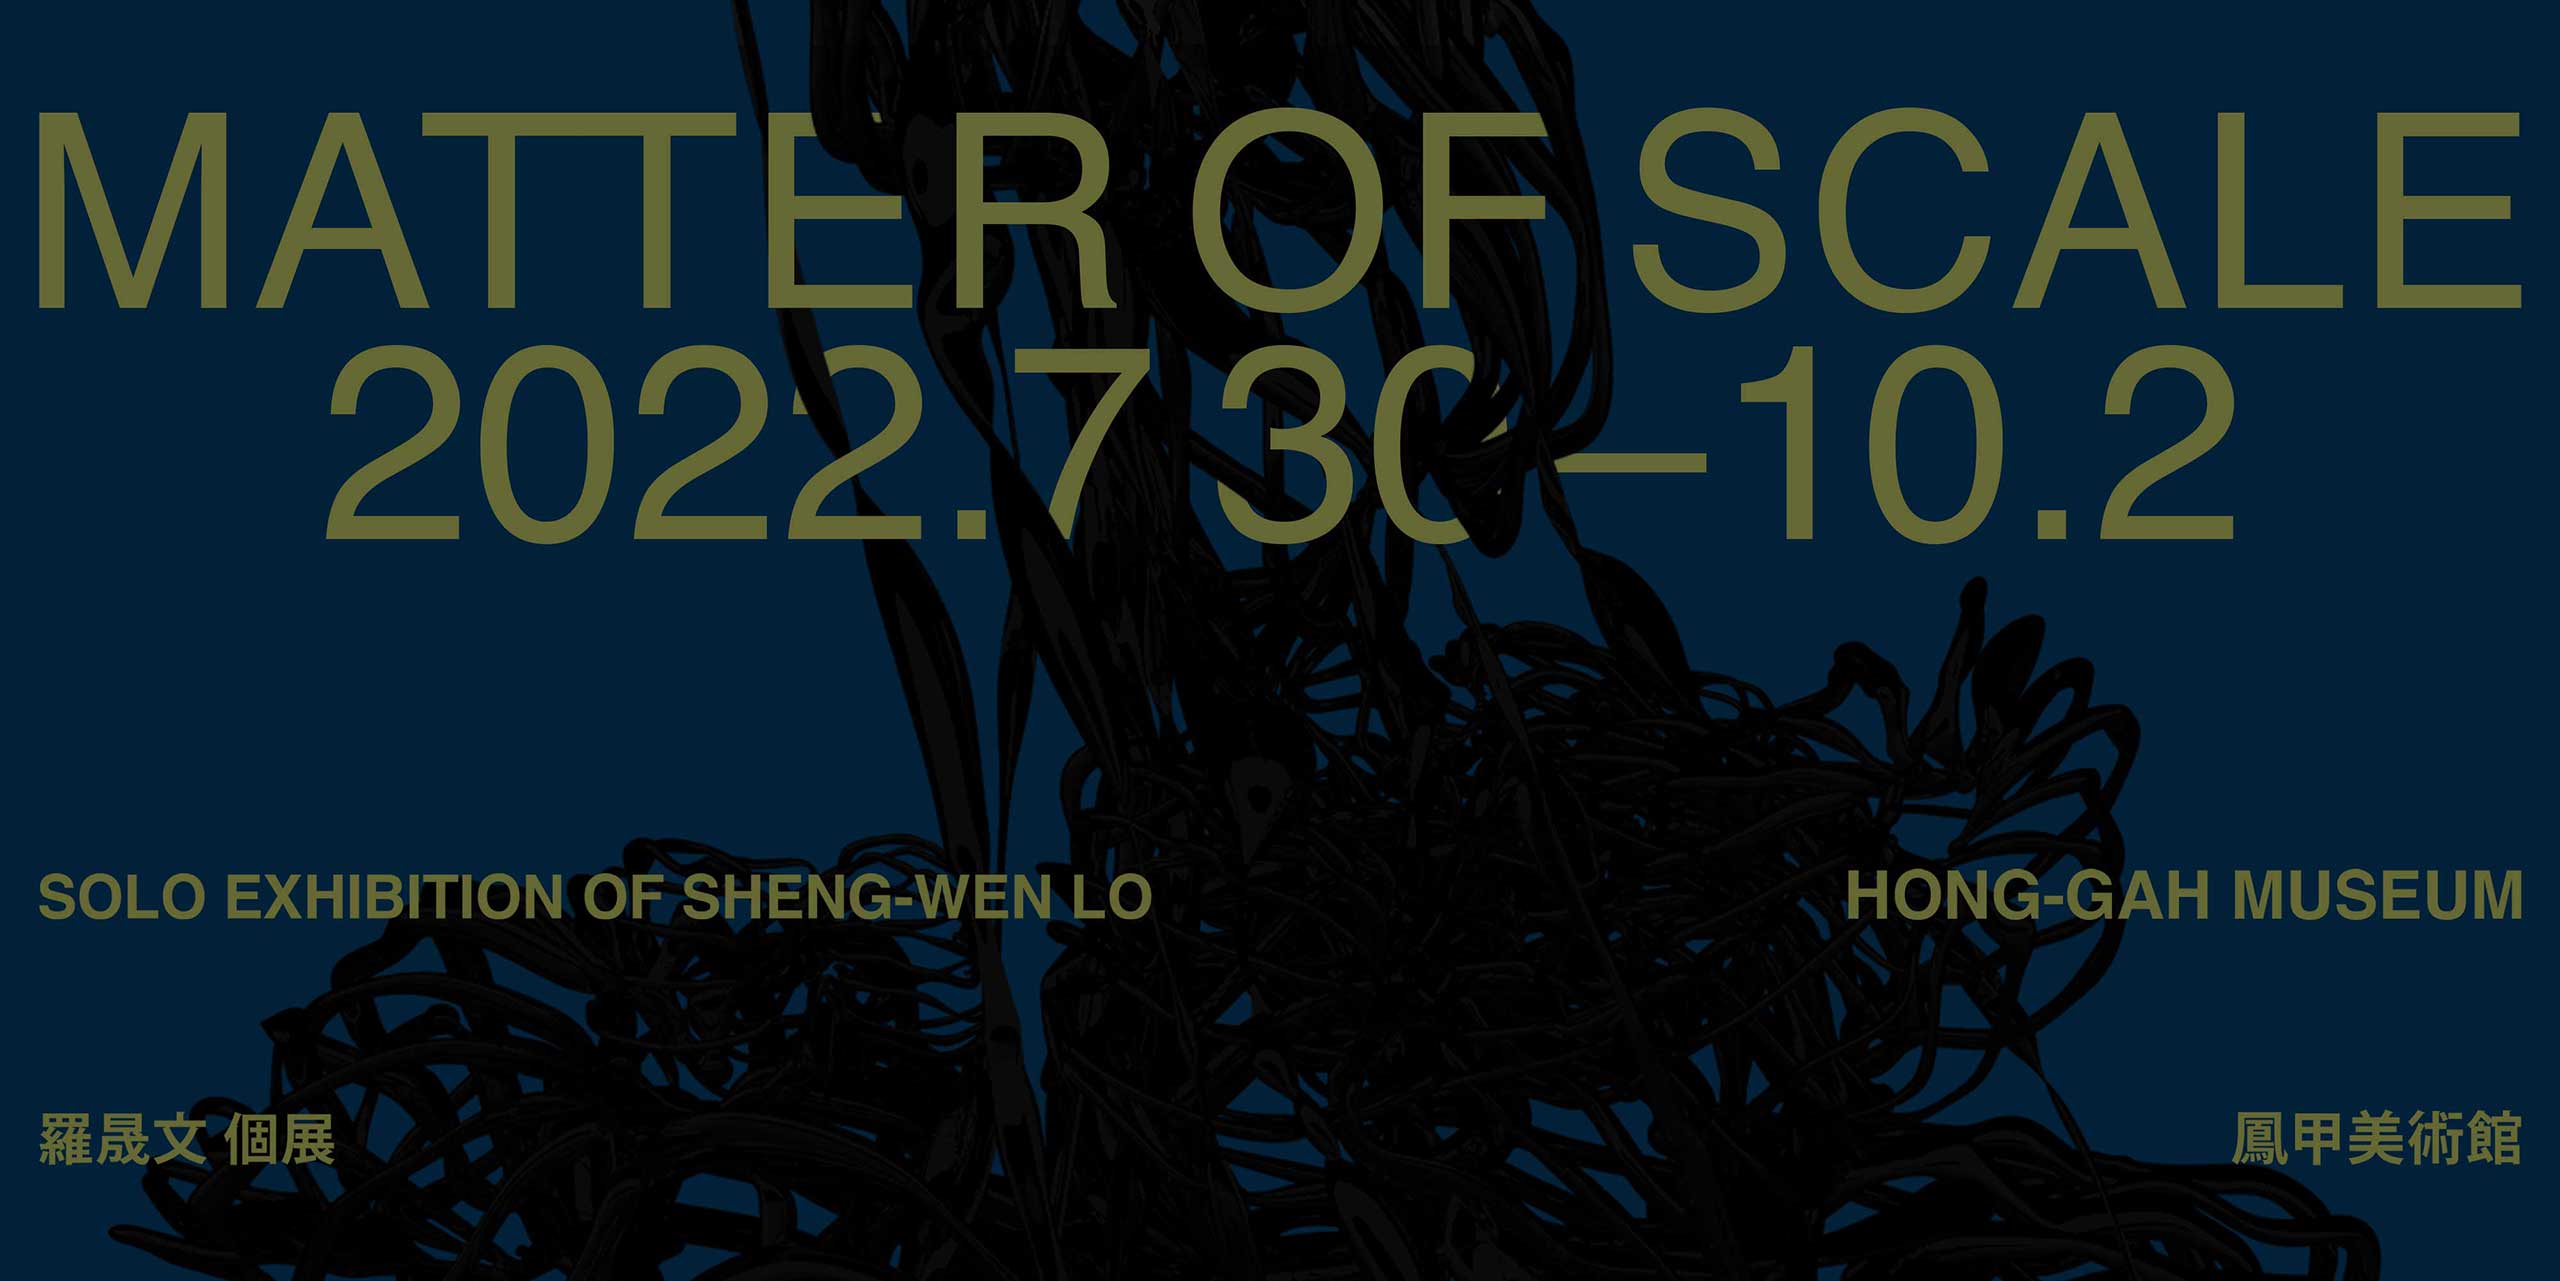 Matter of Scale: Solo Exhibition of Sheng-Wen Lo